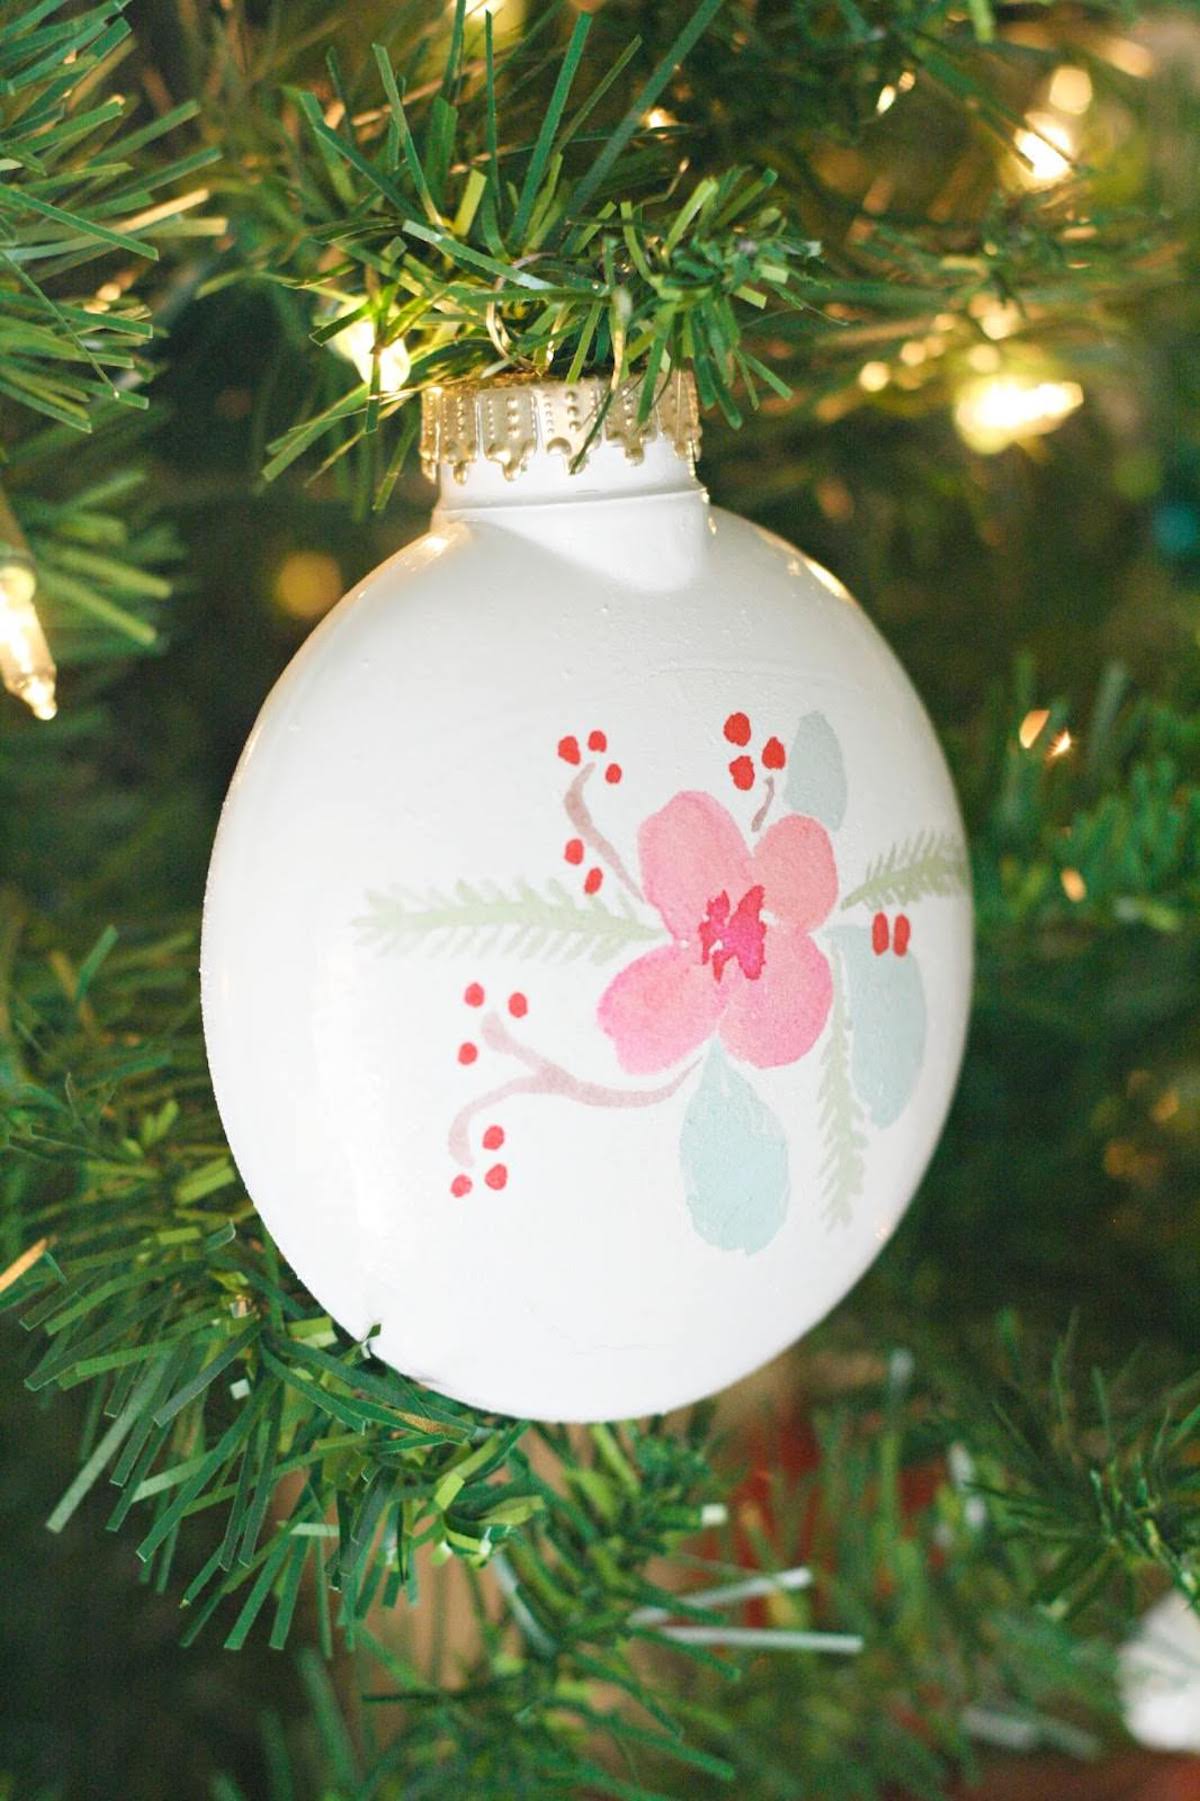 Tattoo ornament hanging on a Christmas tree